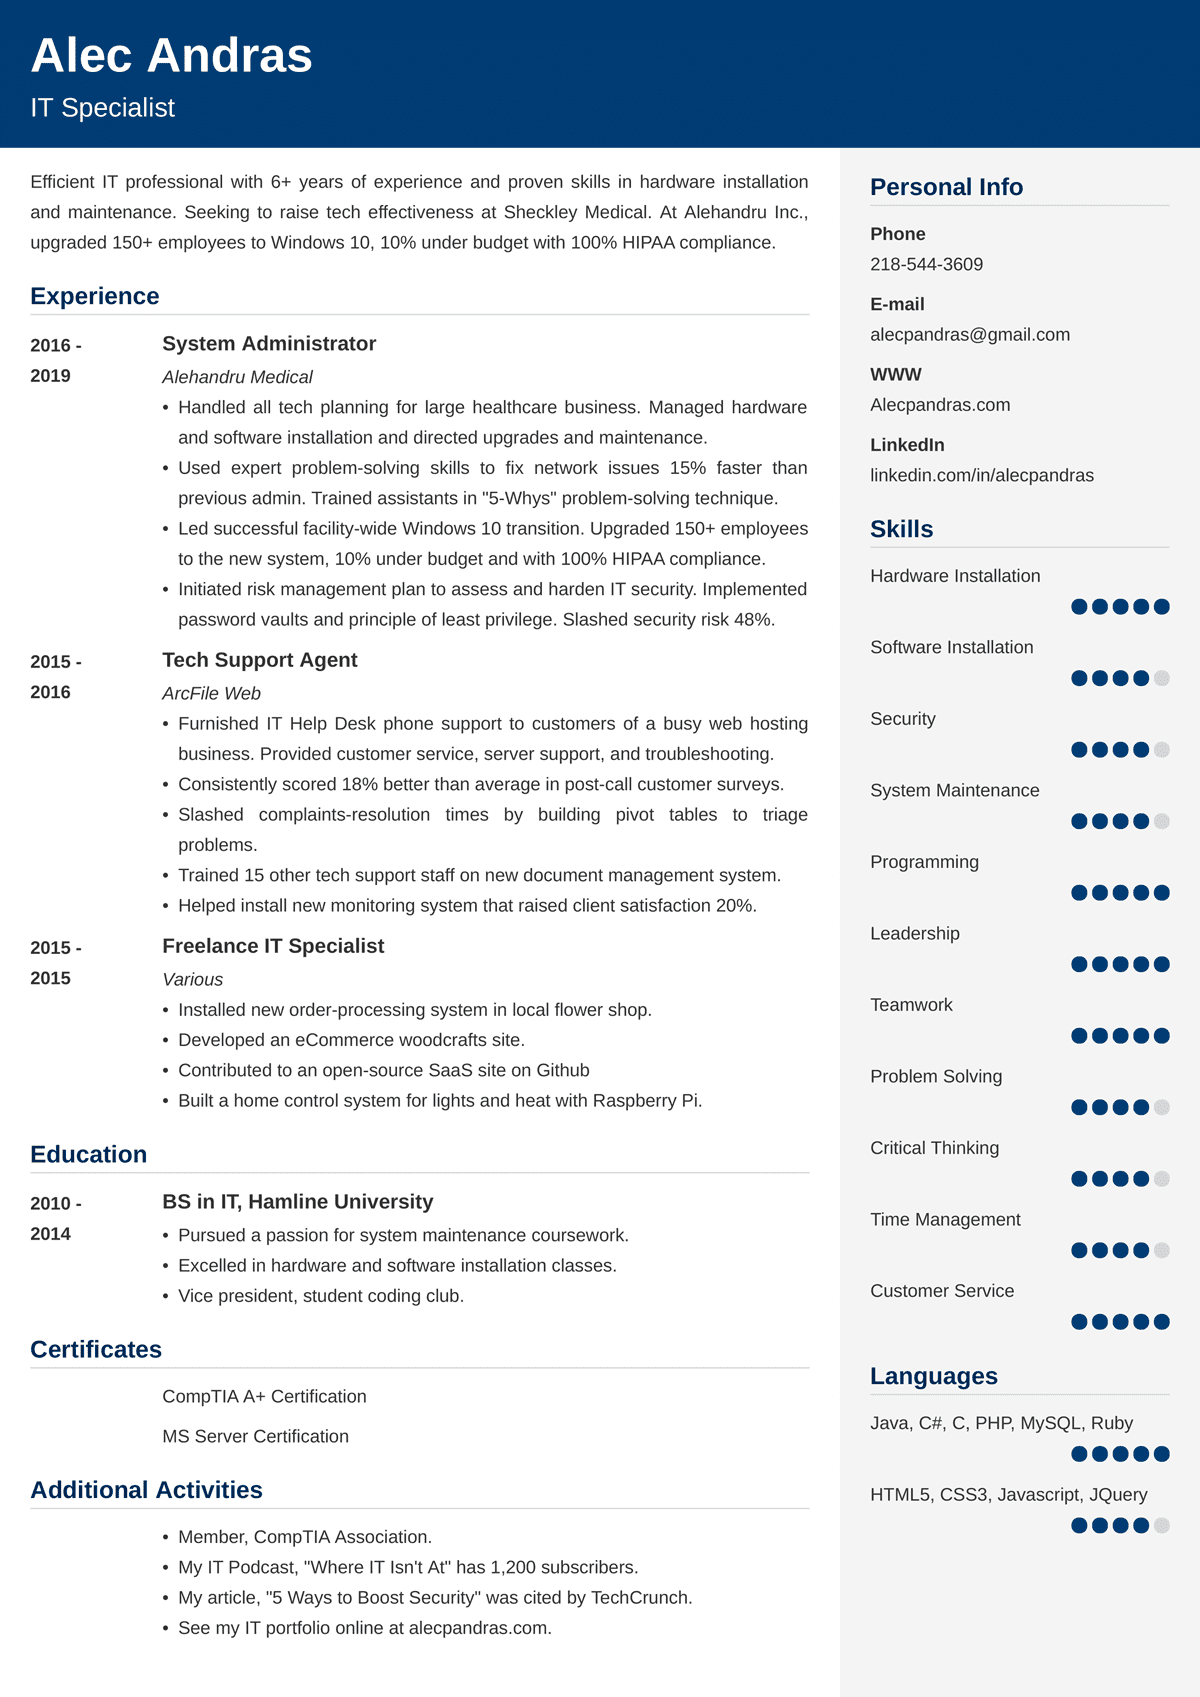 free most professional resume templates